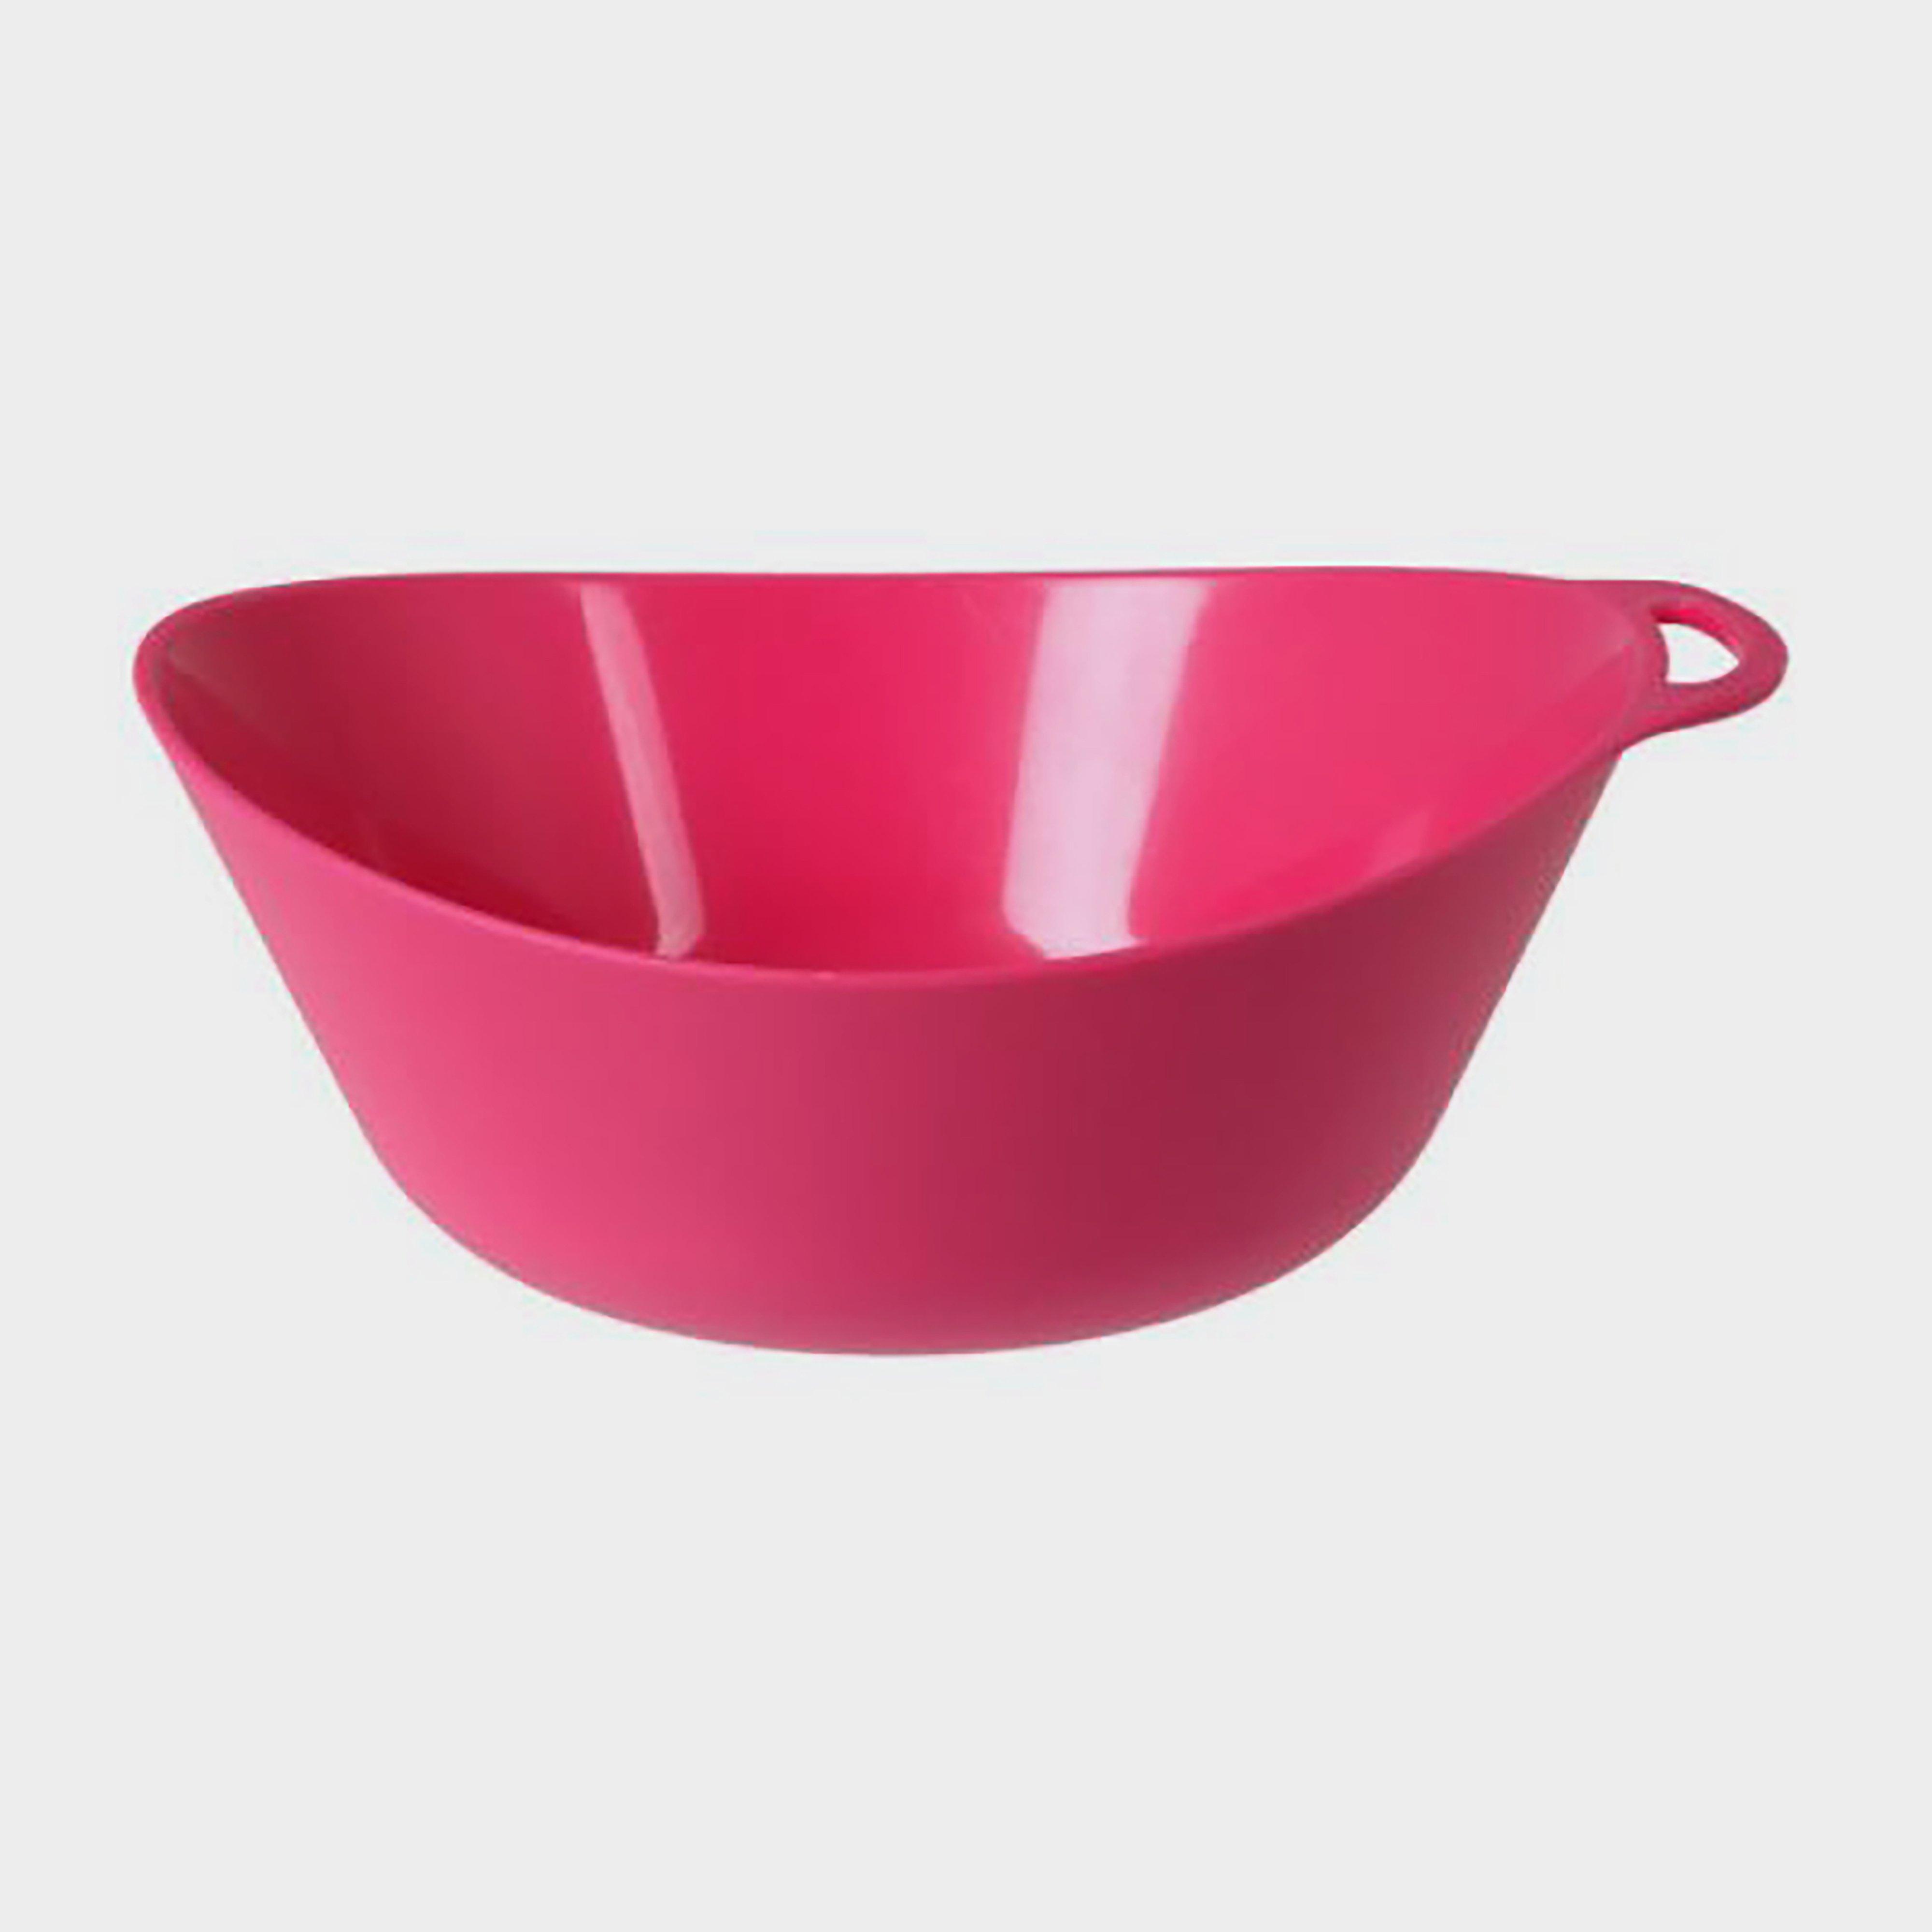 Photos - Other Camping Utensils Lifeventure Ellipse Plastic Camping Bowl, Pink 